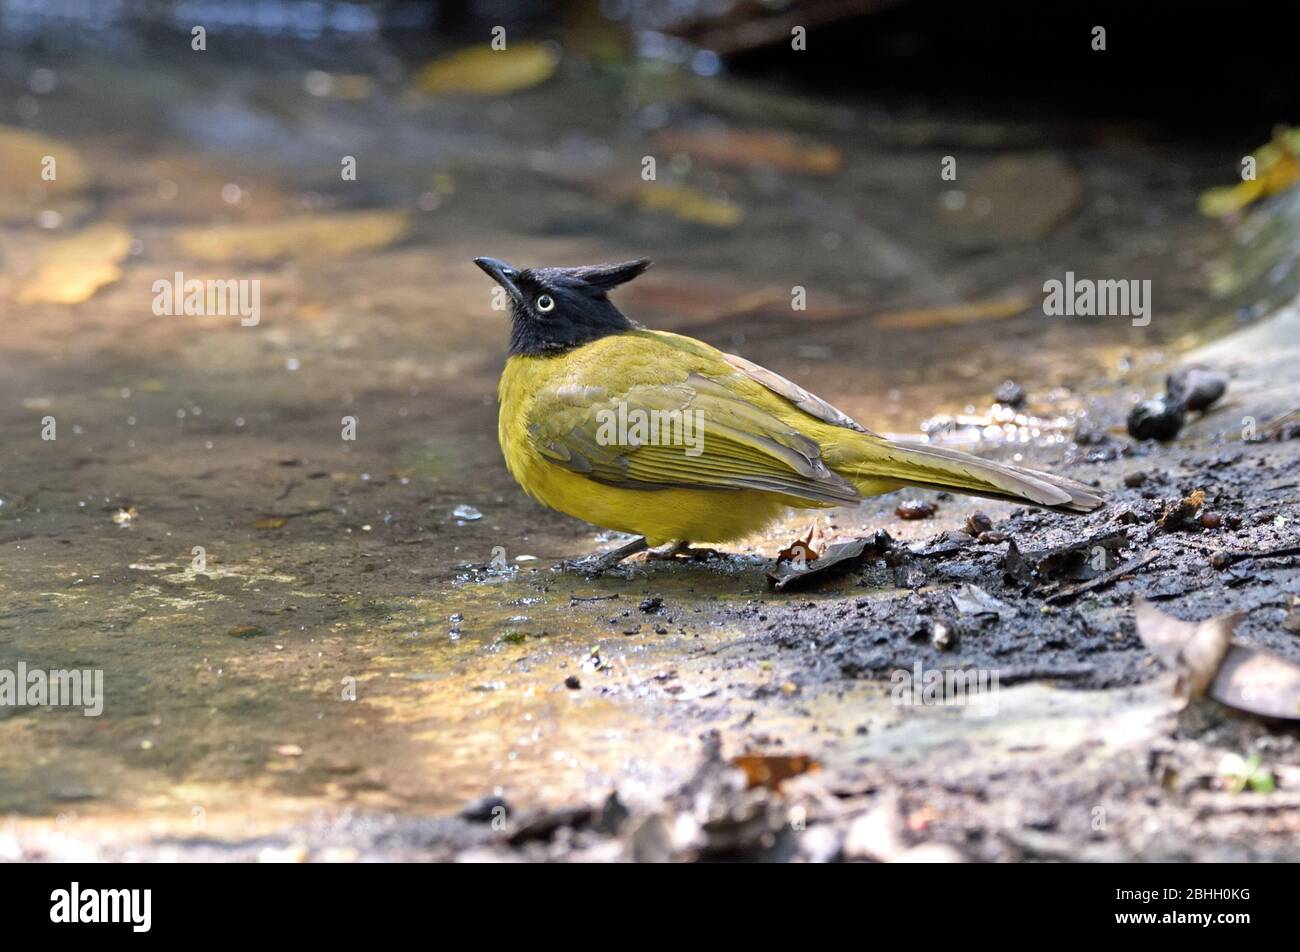 A Black-crested Bulbul (Pycnontus flaviventris) drinking from a small pool in the forest in North Eastern Thailand Stock Photo